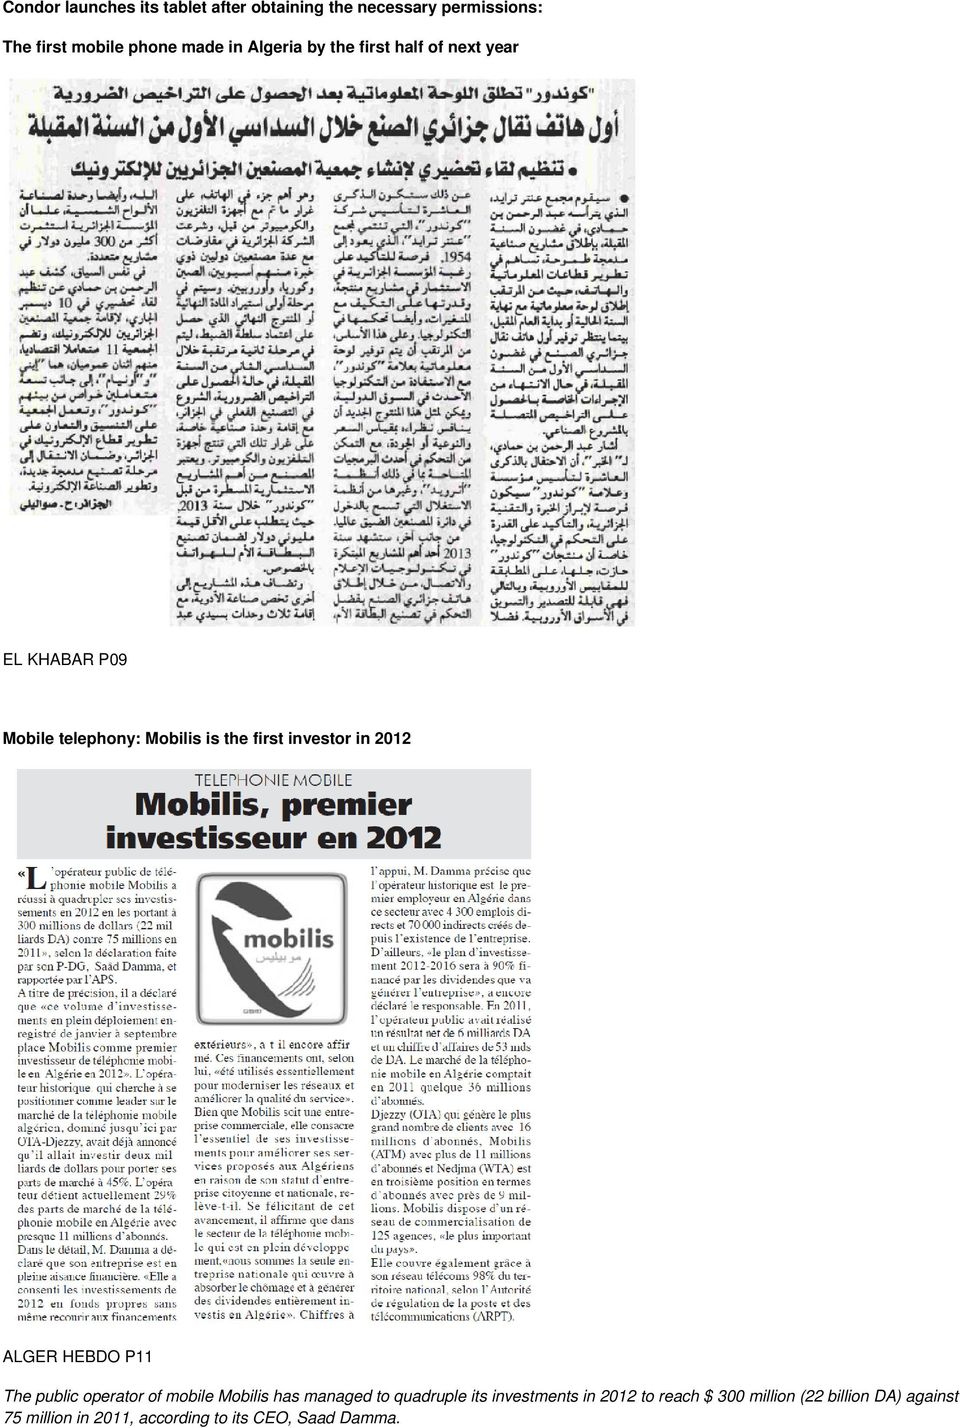 2012 ALGER HEBDO P11 The public operator of mobile Mobilis has managed to quadruple its investments in